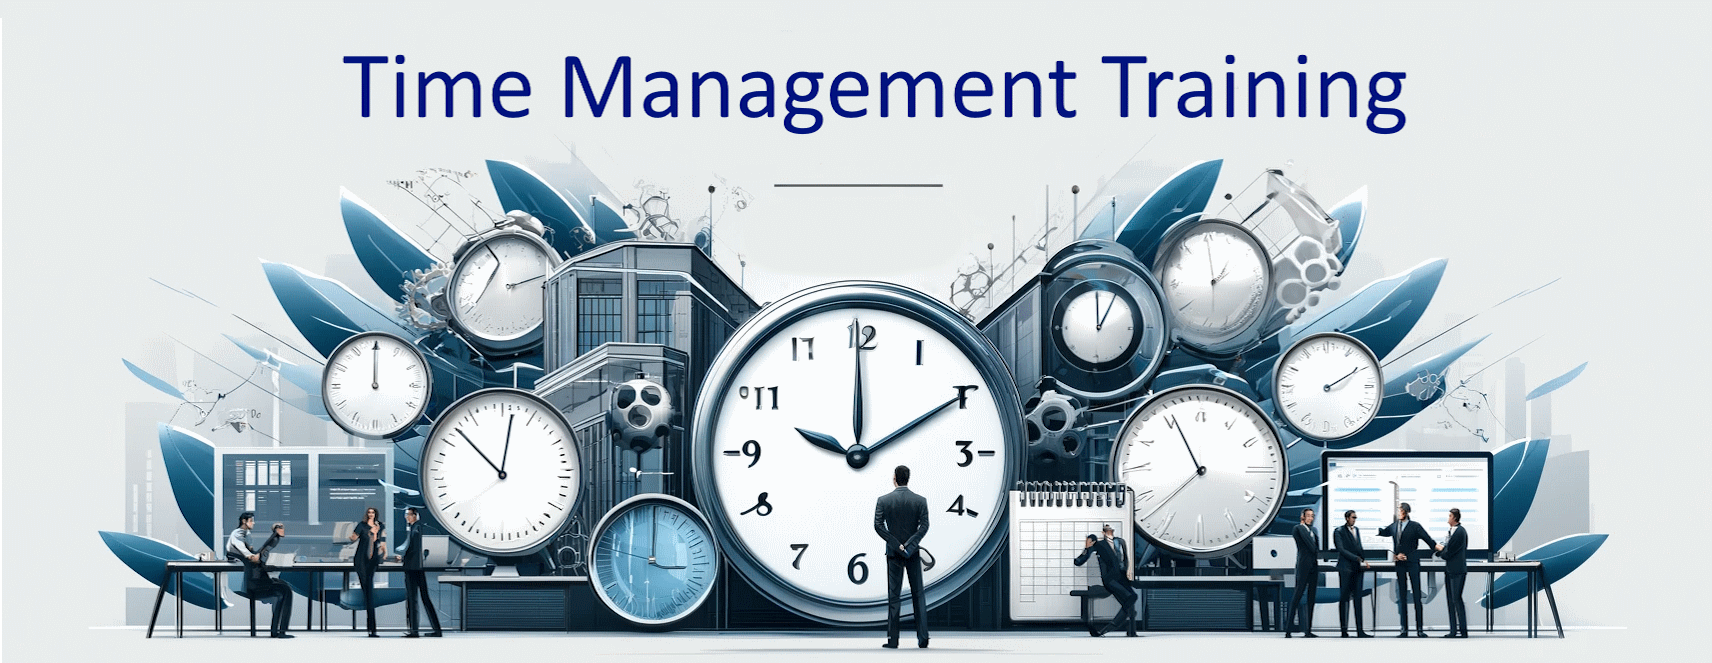 Time Management Skills Course (£695 total for this 1-day course for a group of up to 12 people)